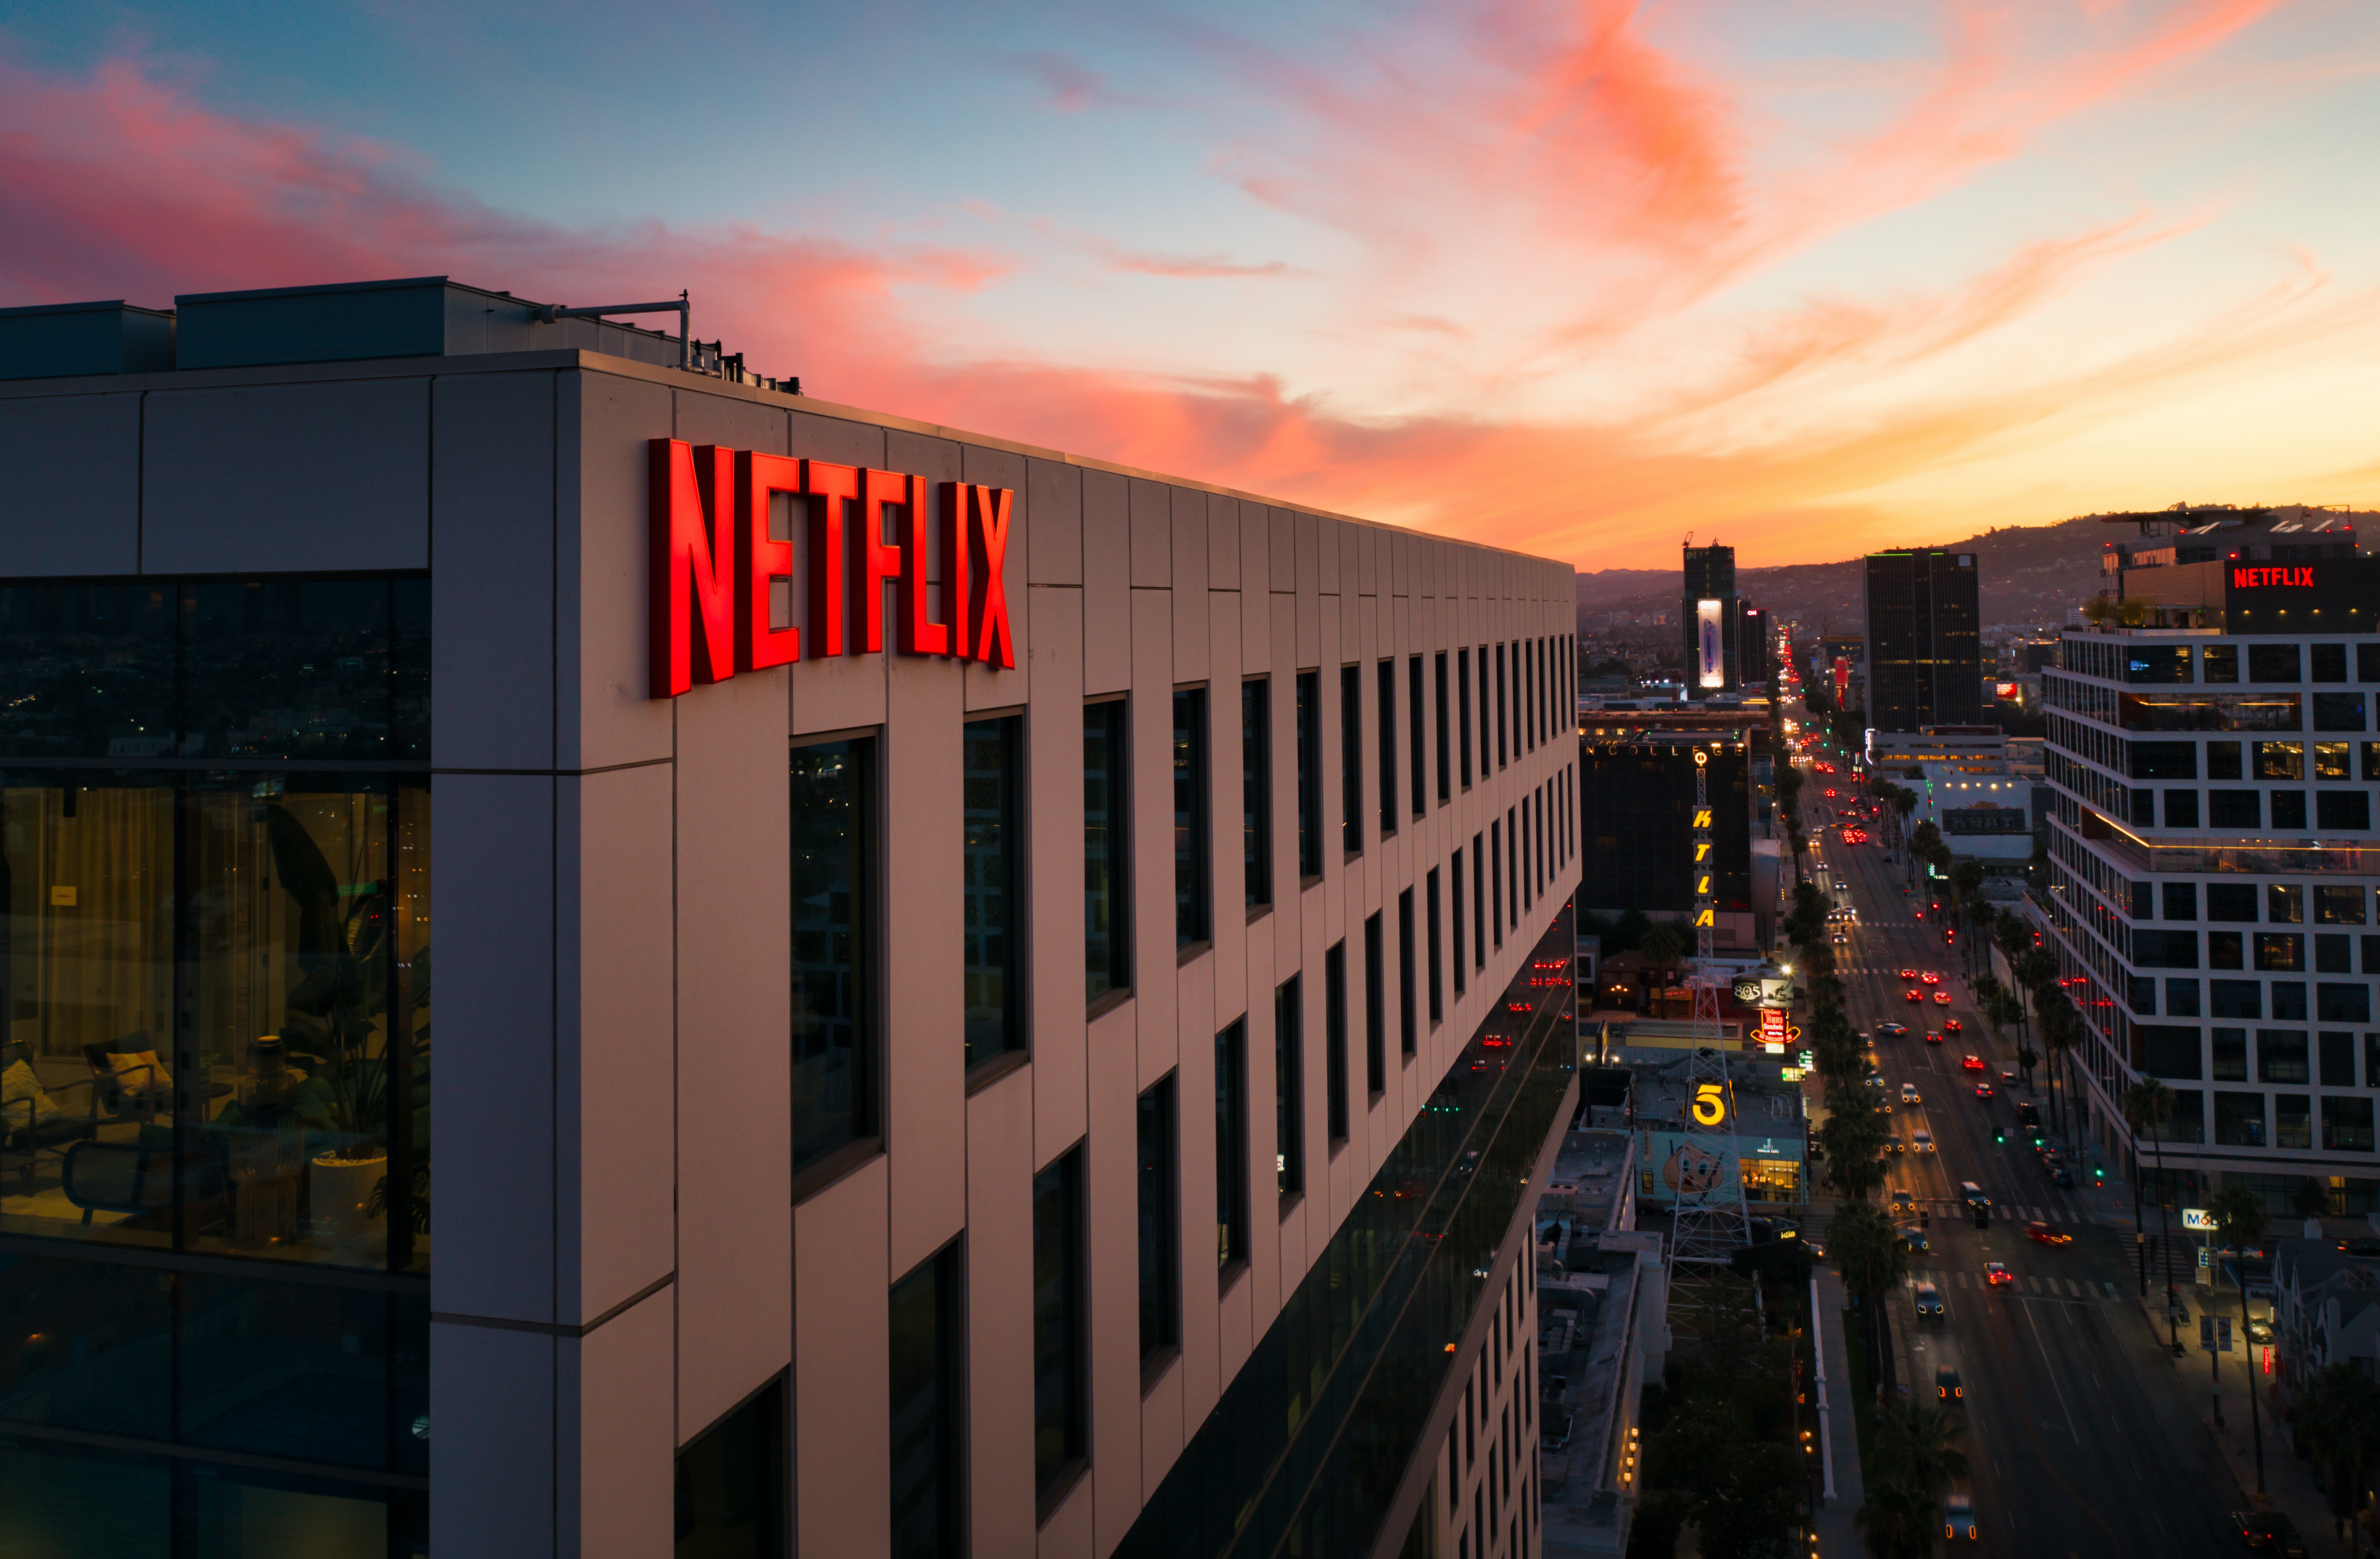 Netflix - the streaming giant continues to grow